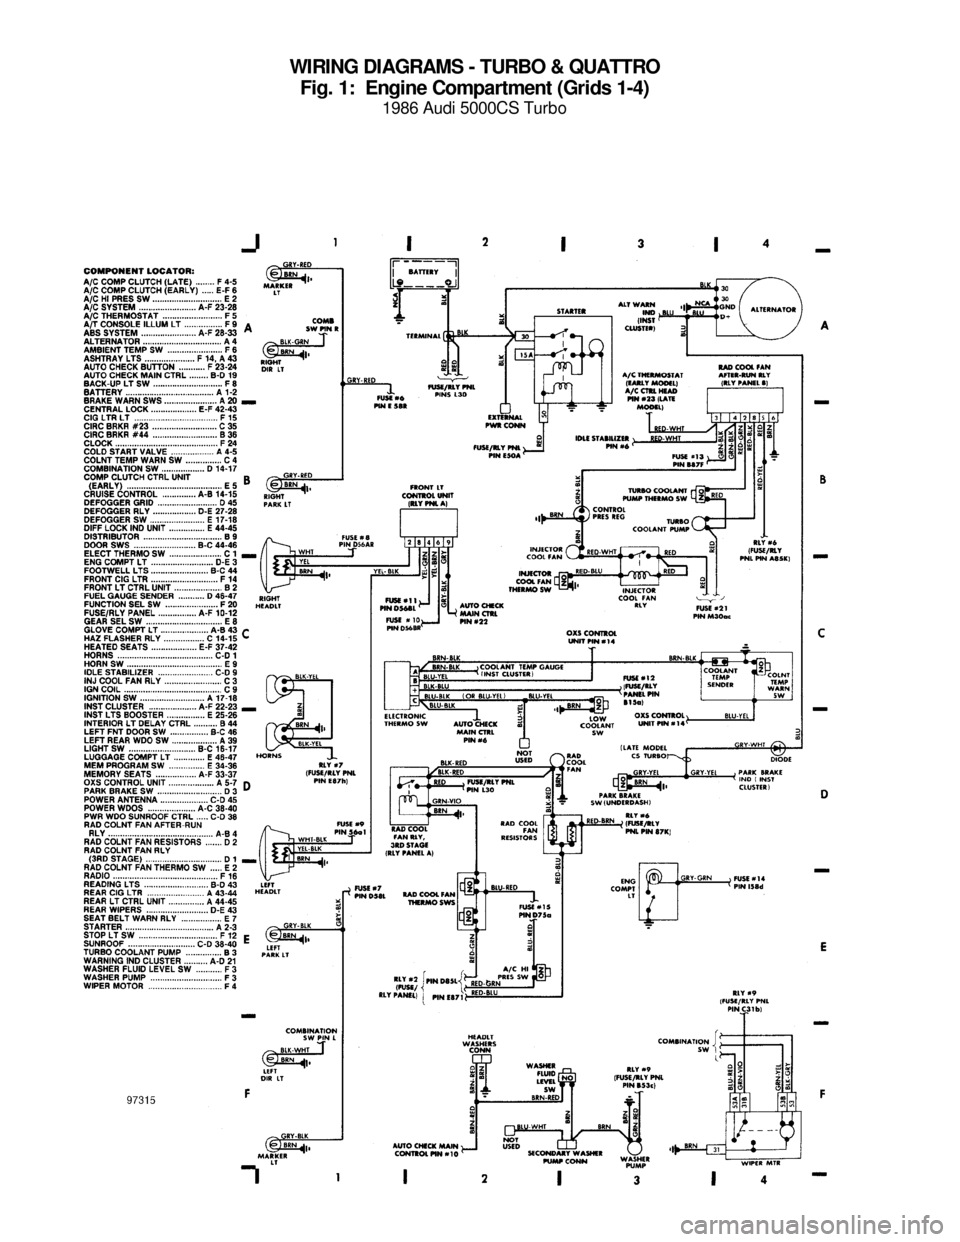 AUDI 5000CS 1986 C2 System Wiring Diagram WIRING DIAGRAMS - TURBO & QUATTRO
Fig. 1:  Engine Compartment (Grids 1-4)
1986 Audi 5000CS Turbo
For x    
Copyright © 1998 Mitchell Repair Information Company, LLCMonday, July 19, 2004  05:55PM 